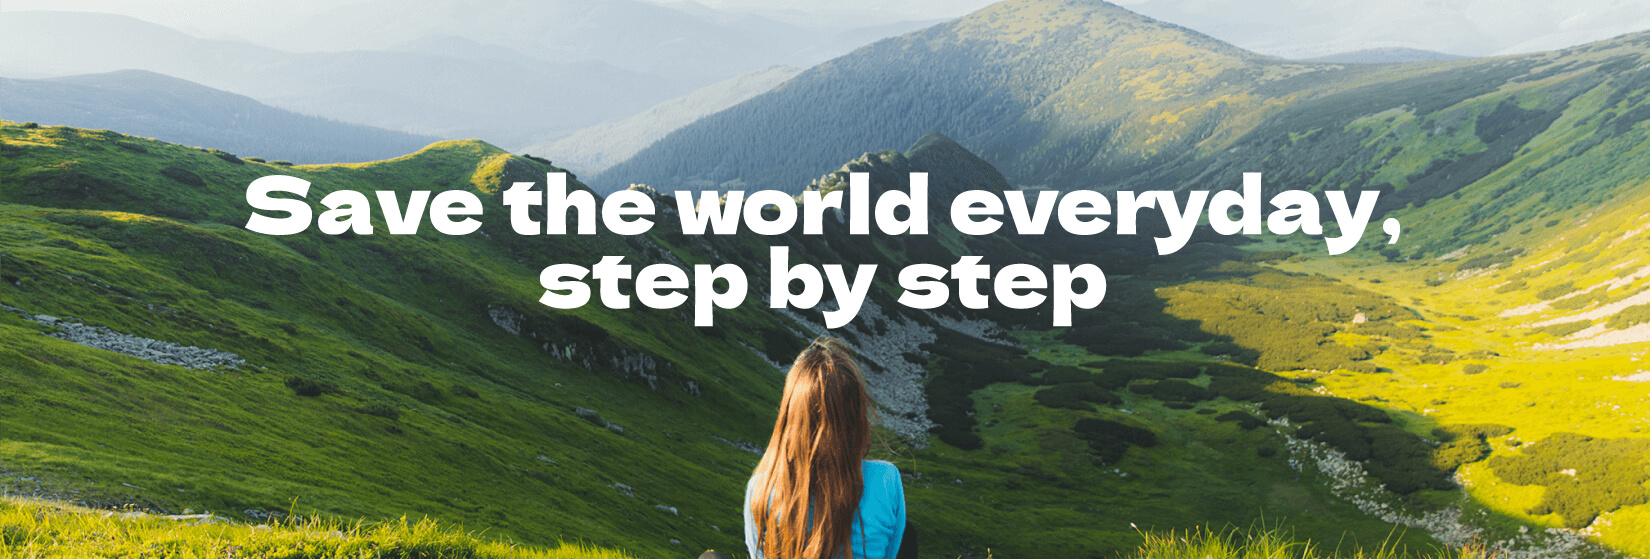 save the world everyday step by step ads